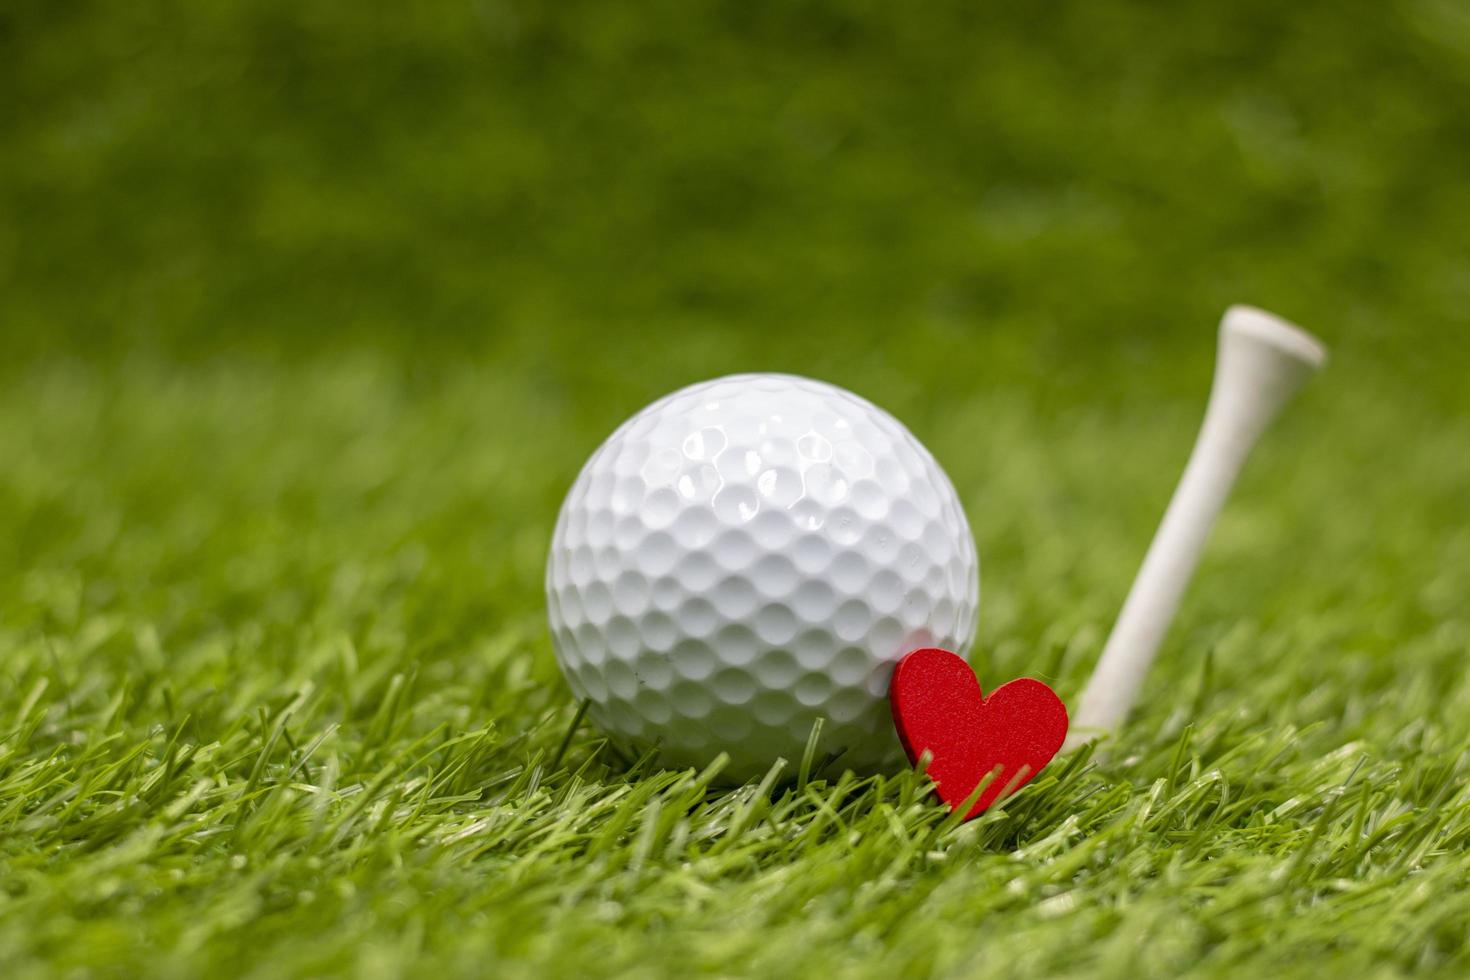 Golf ball with tee is on green grass with love photo